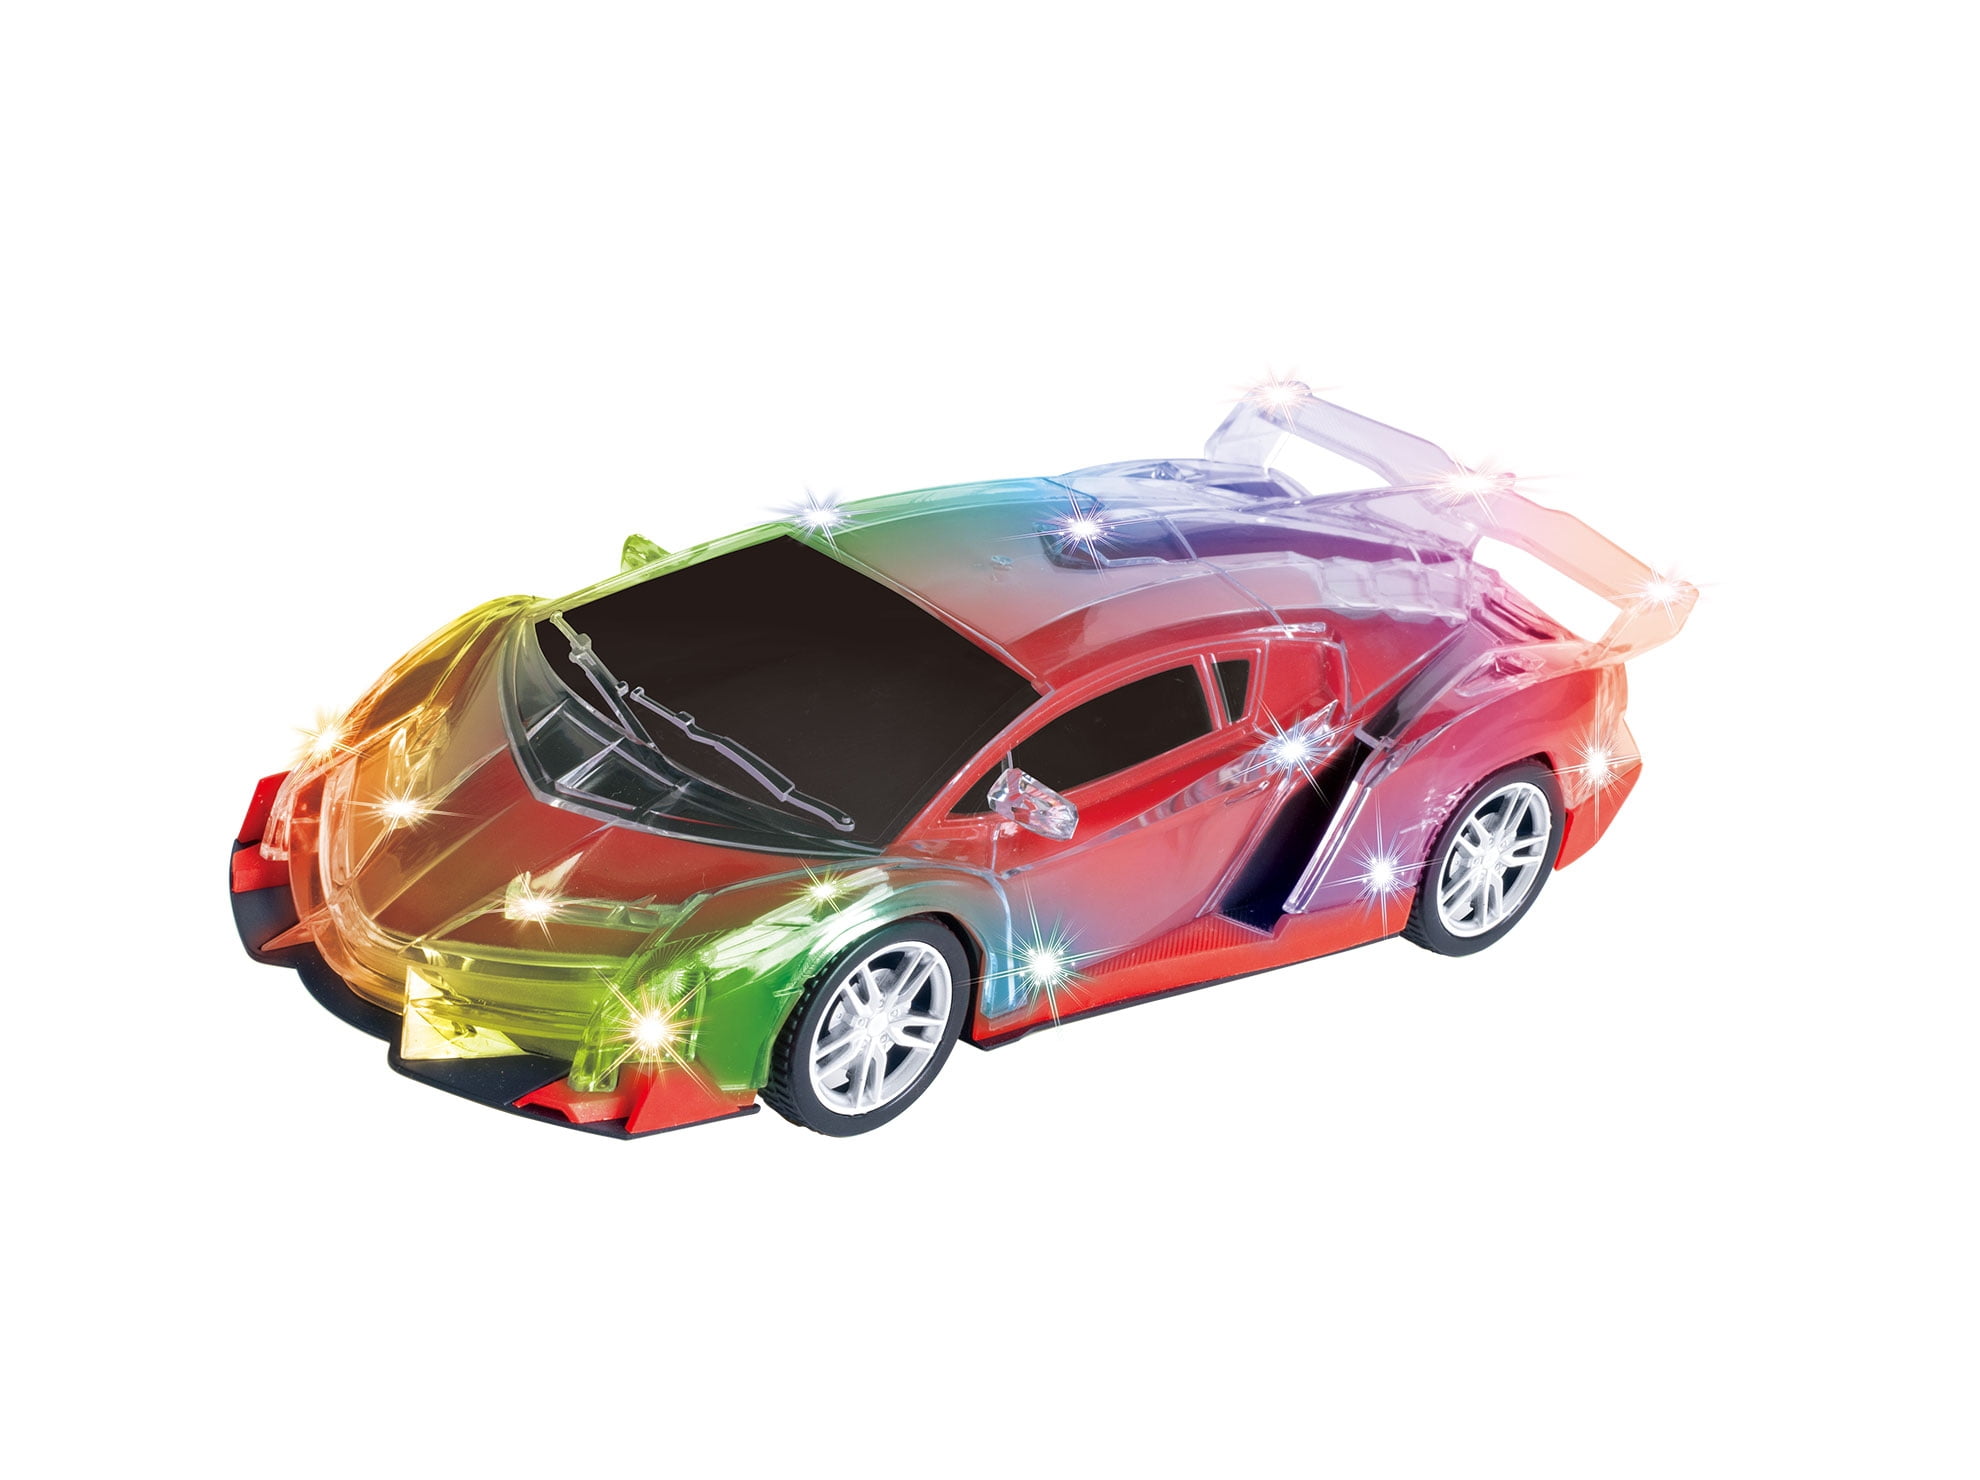 Steering Wheel, LED Lights, Sound Effect and More Ferrari Remote Control Car 